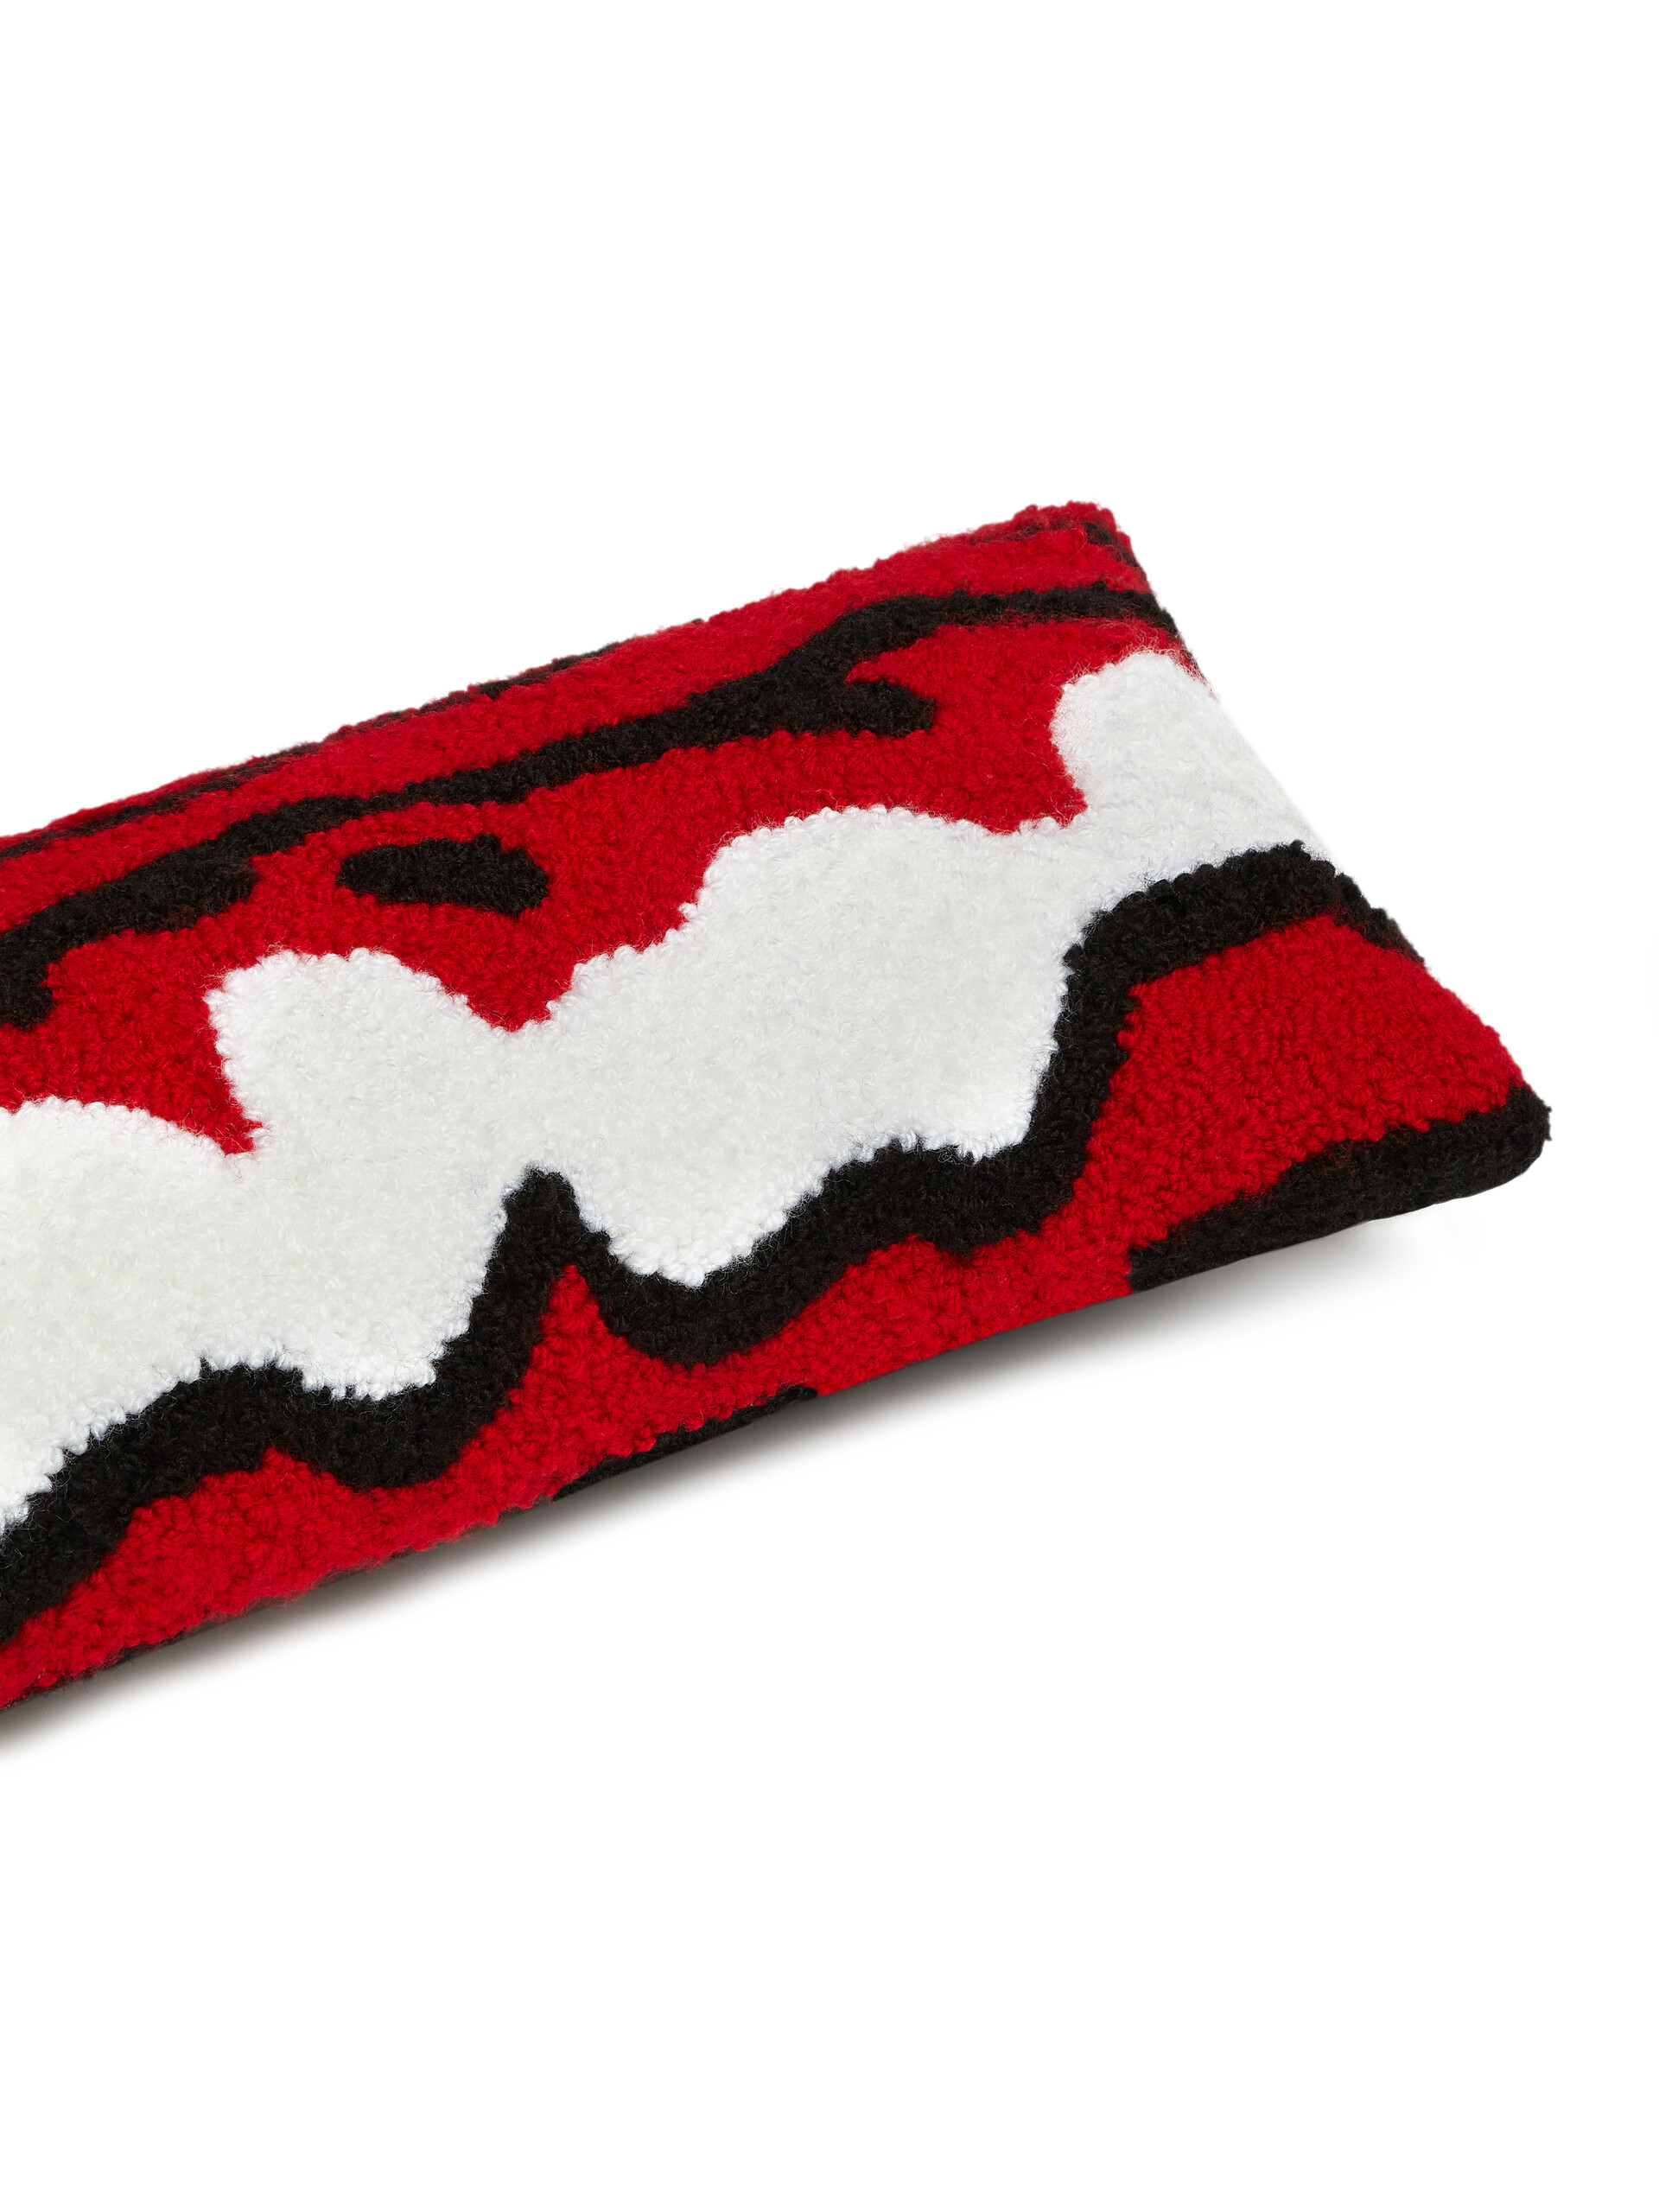 Abstract technical fabric MARNI MARKET pillow - Furniture - Image 3